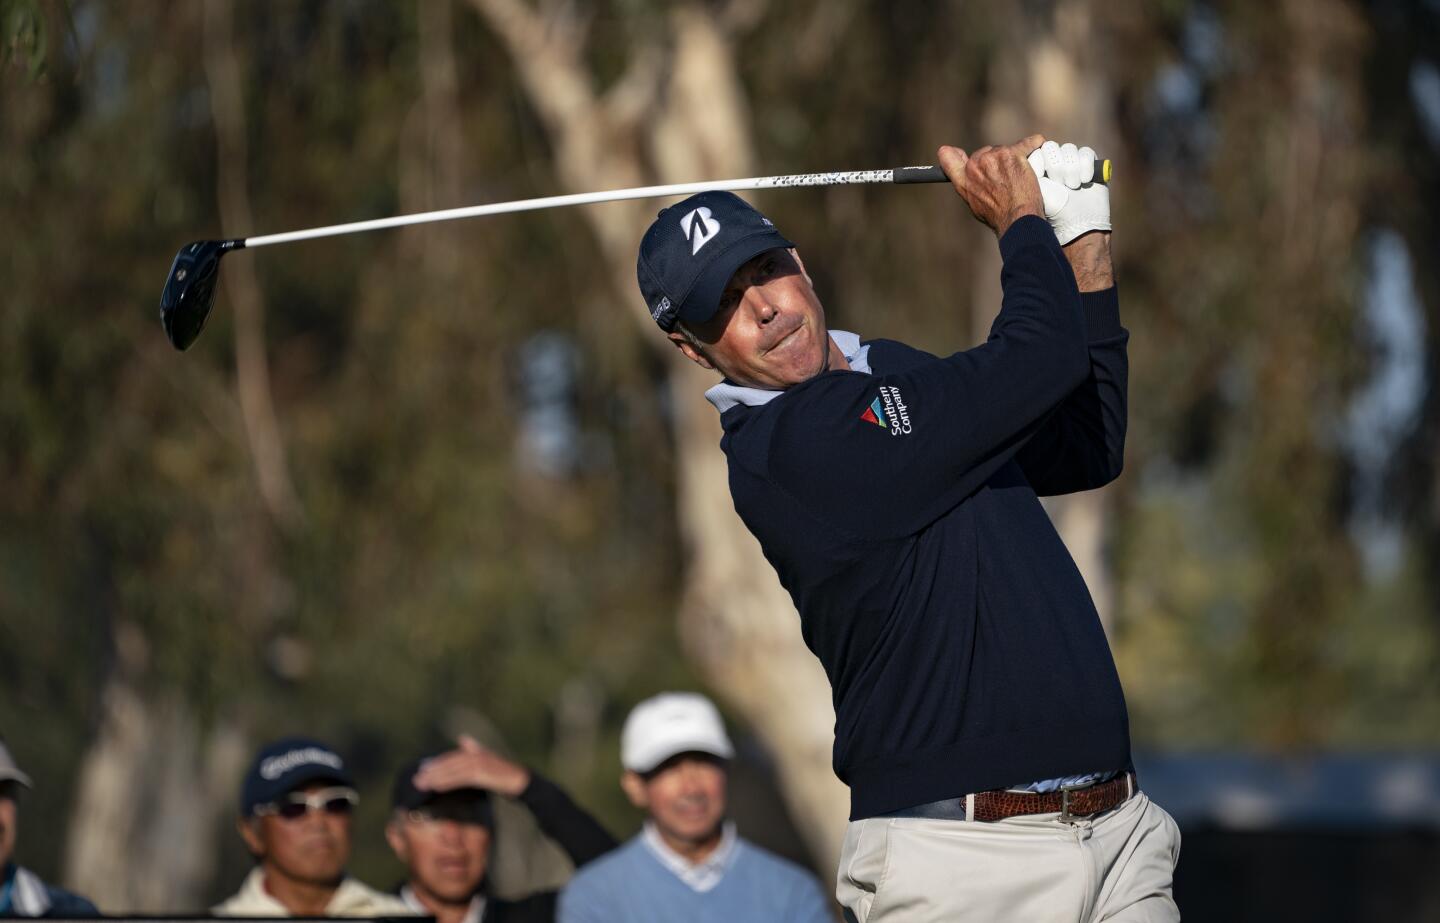 Matt Kuchar hits off the 15th tee during the second round of the Genesis Invitational at Riviera Country Club on Feb. 14, 2020.